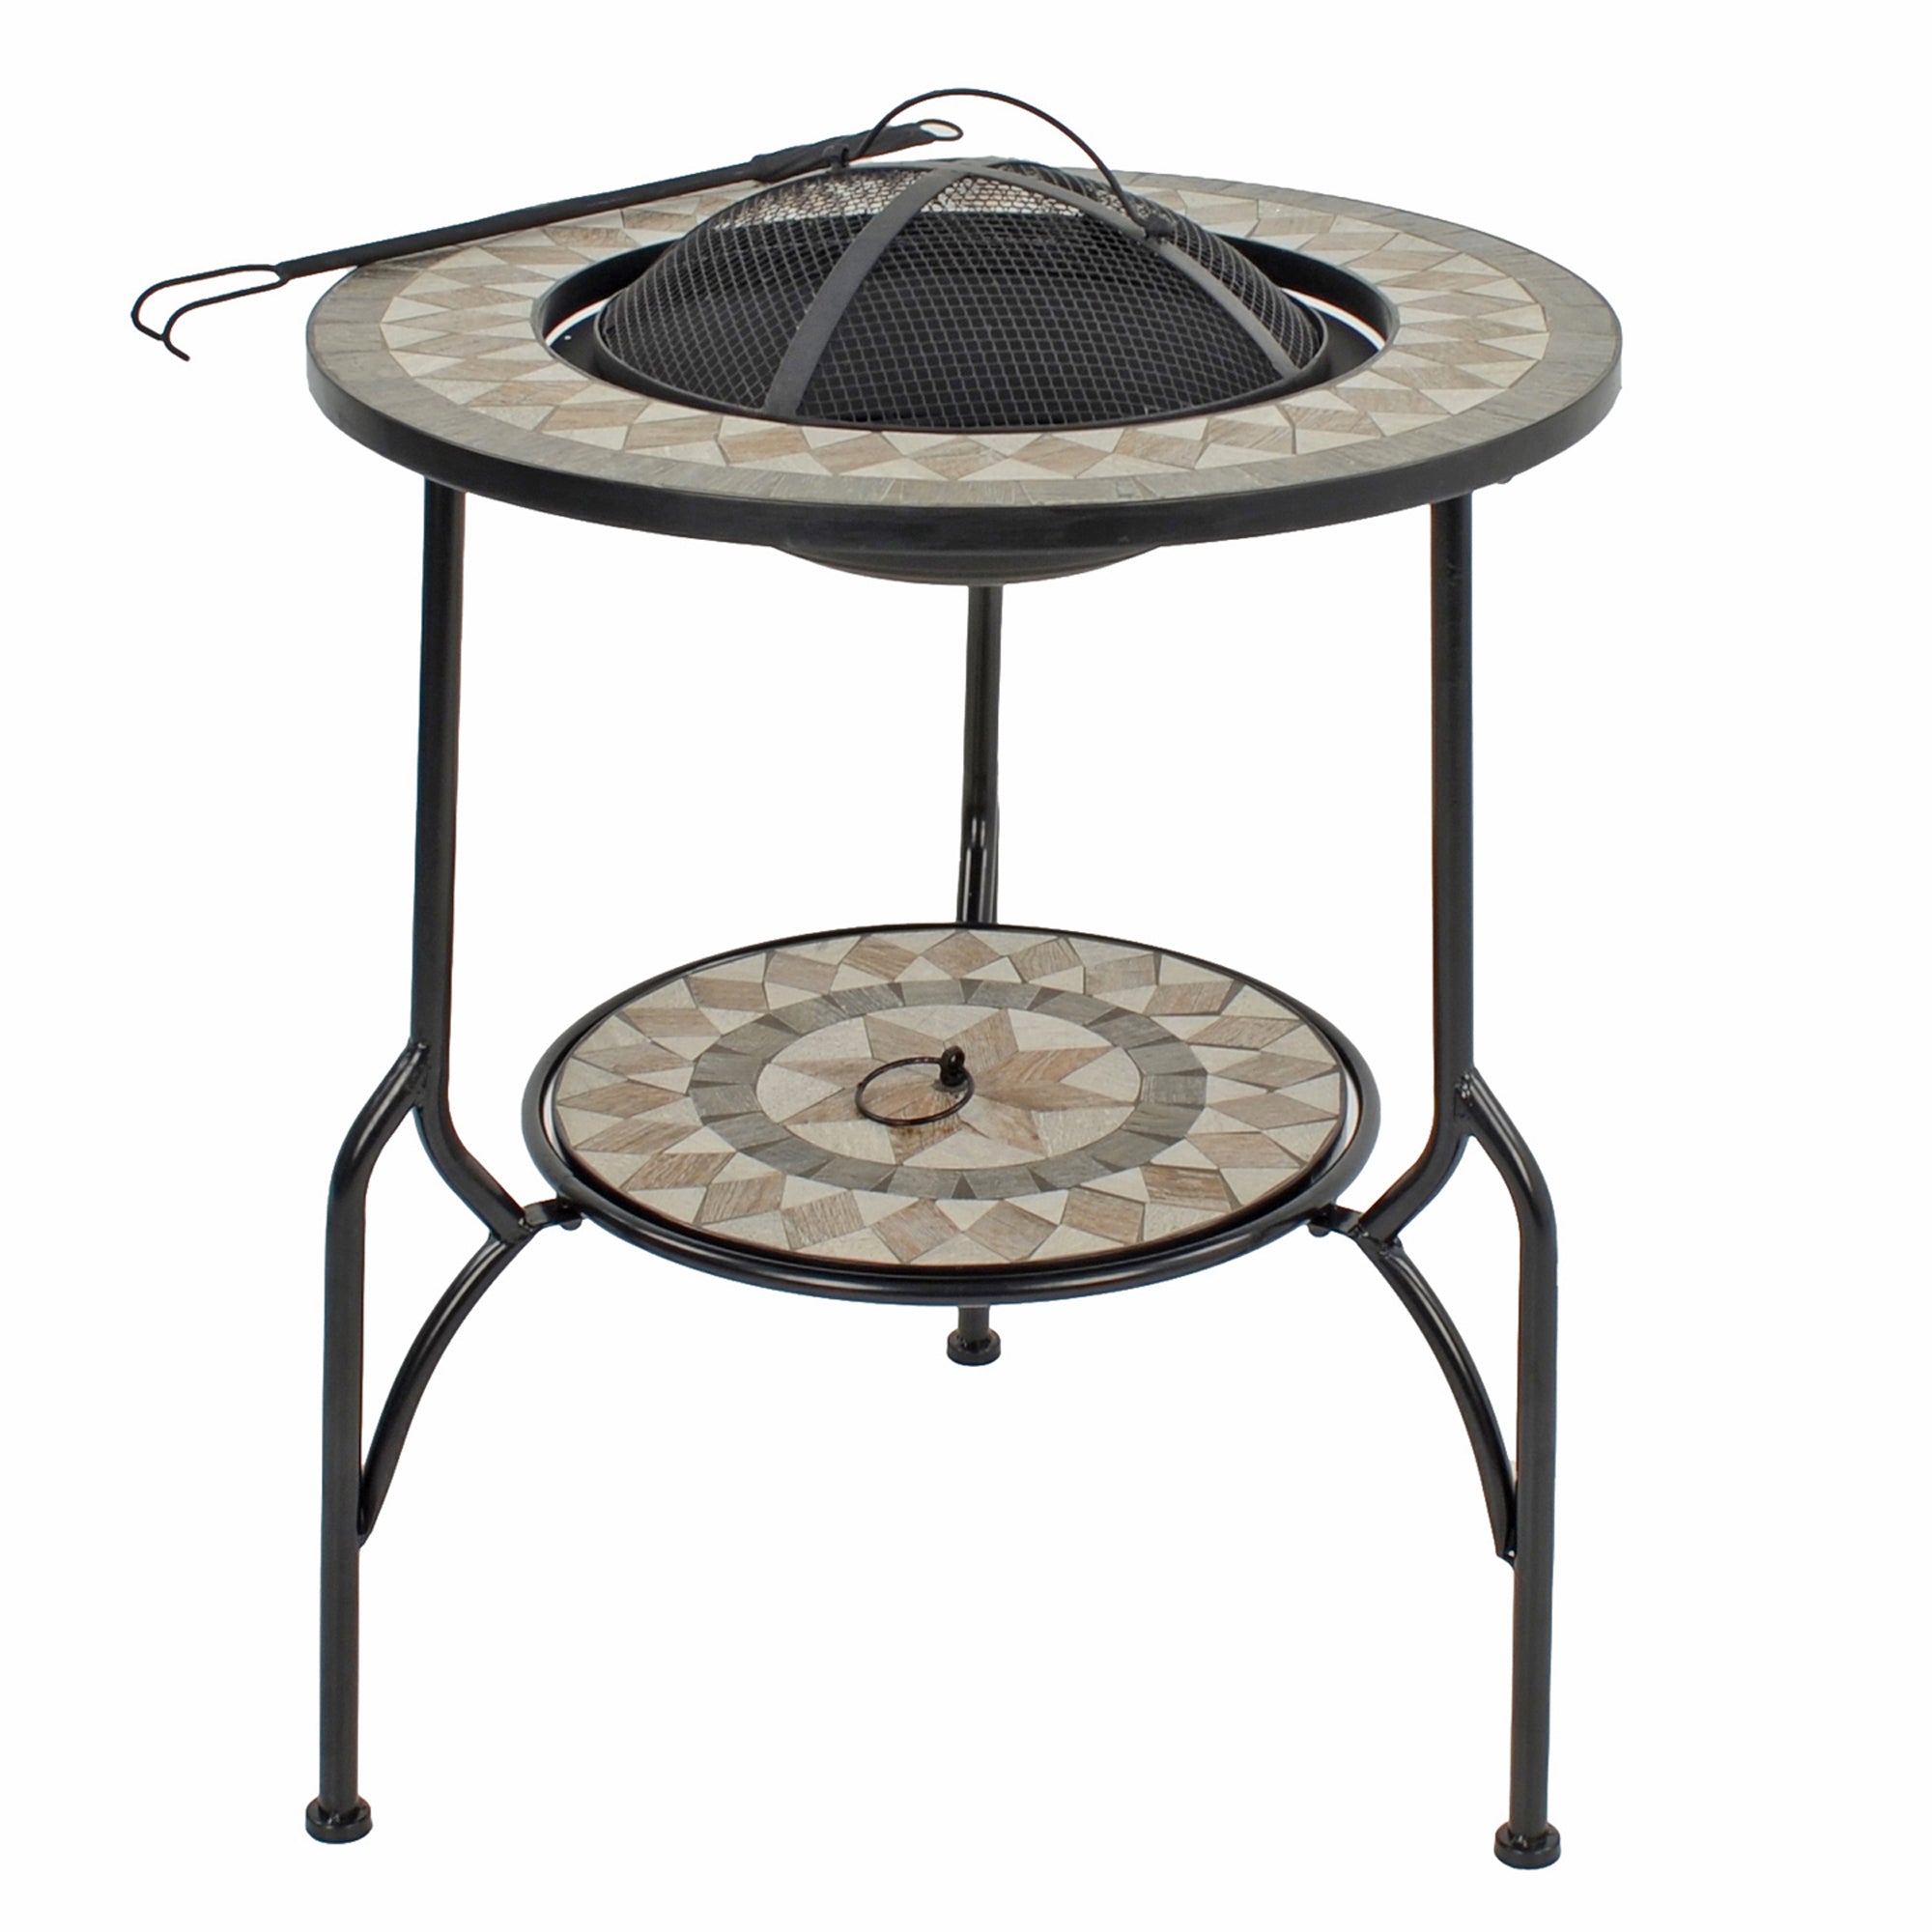 Summer Terrace Brava 60cm Fire Pit Patio Set with San Remo Chairs Dining Sets Summer Terrace   